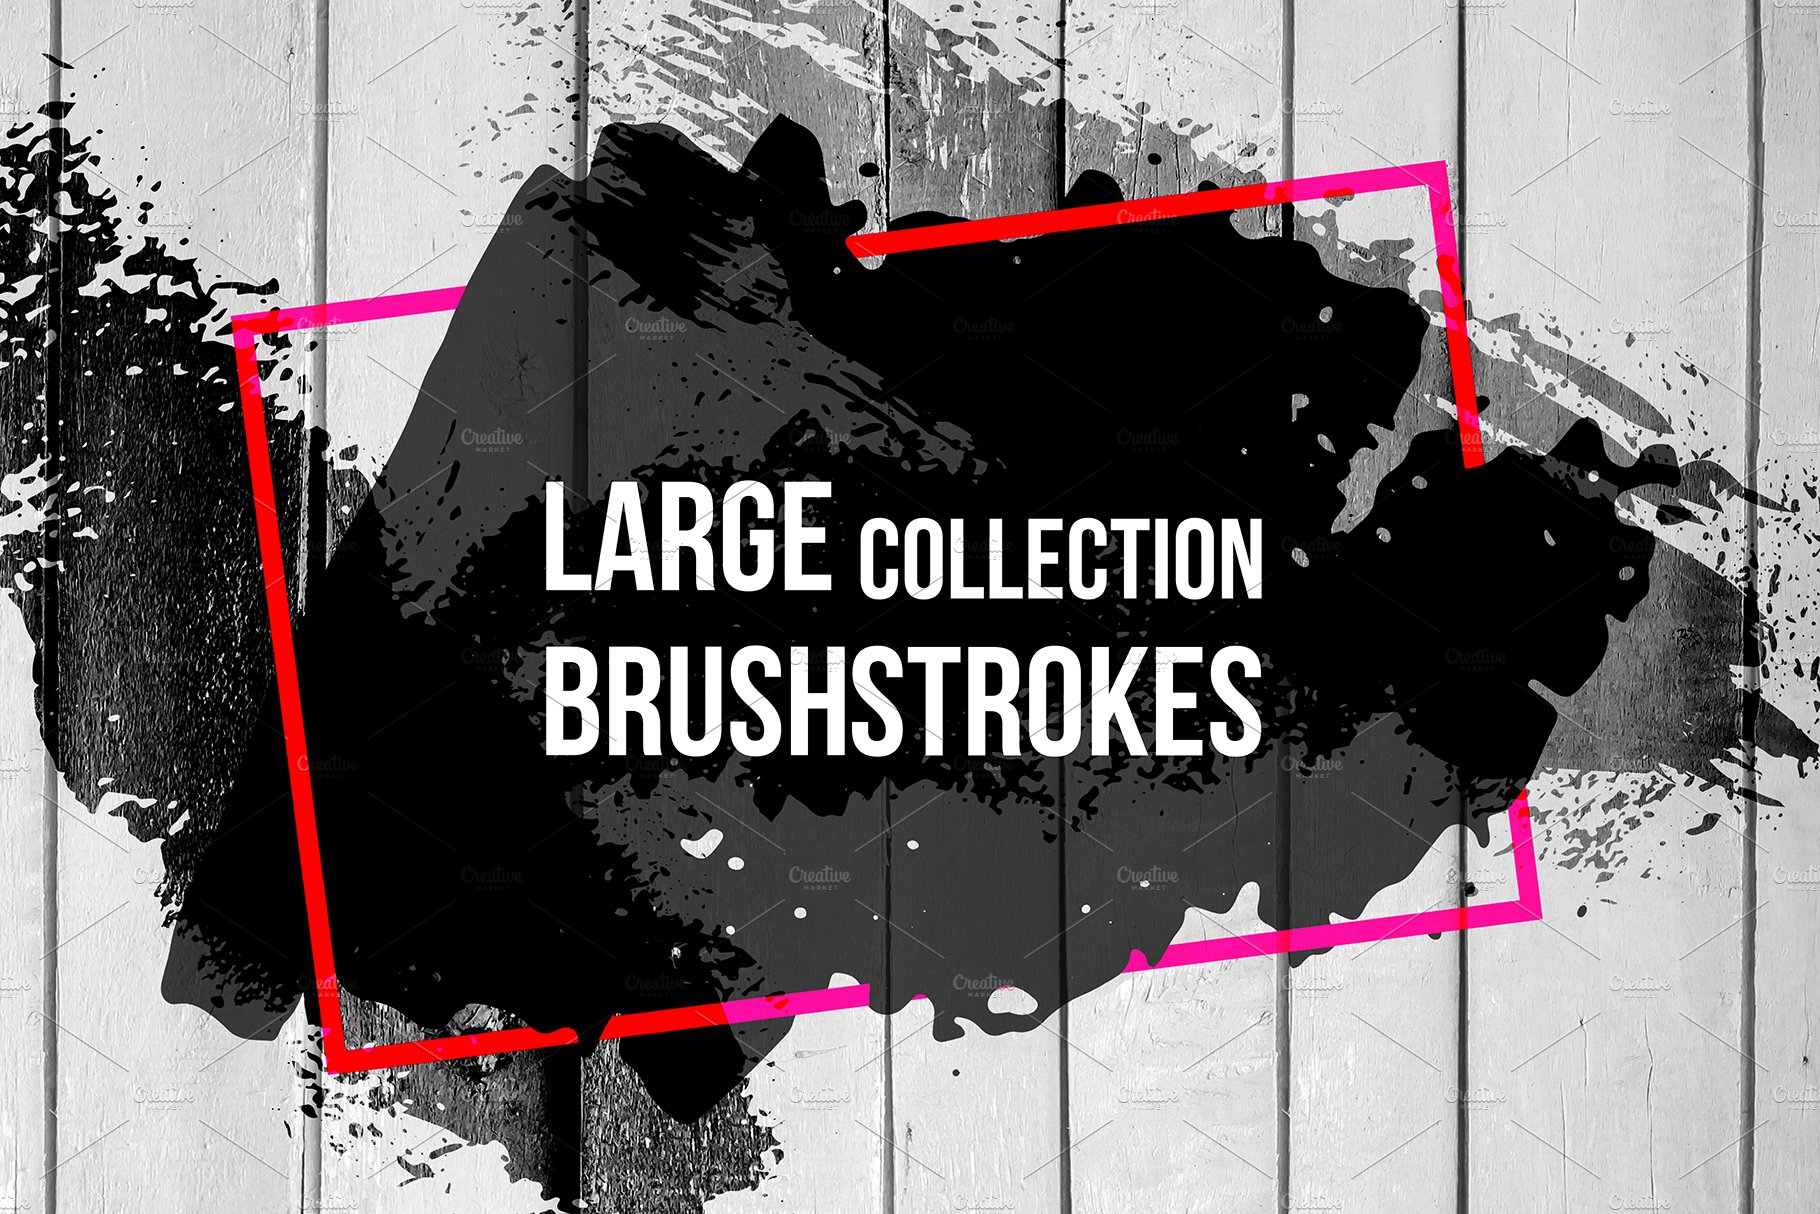 Collection Brushstrokescover image.